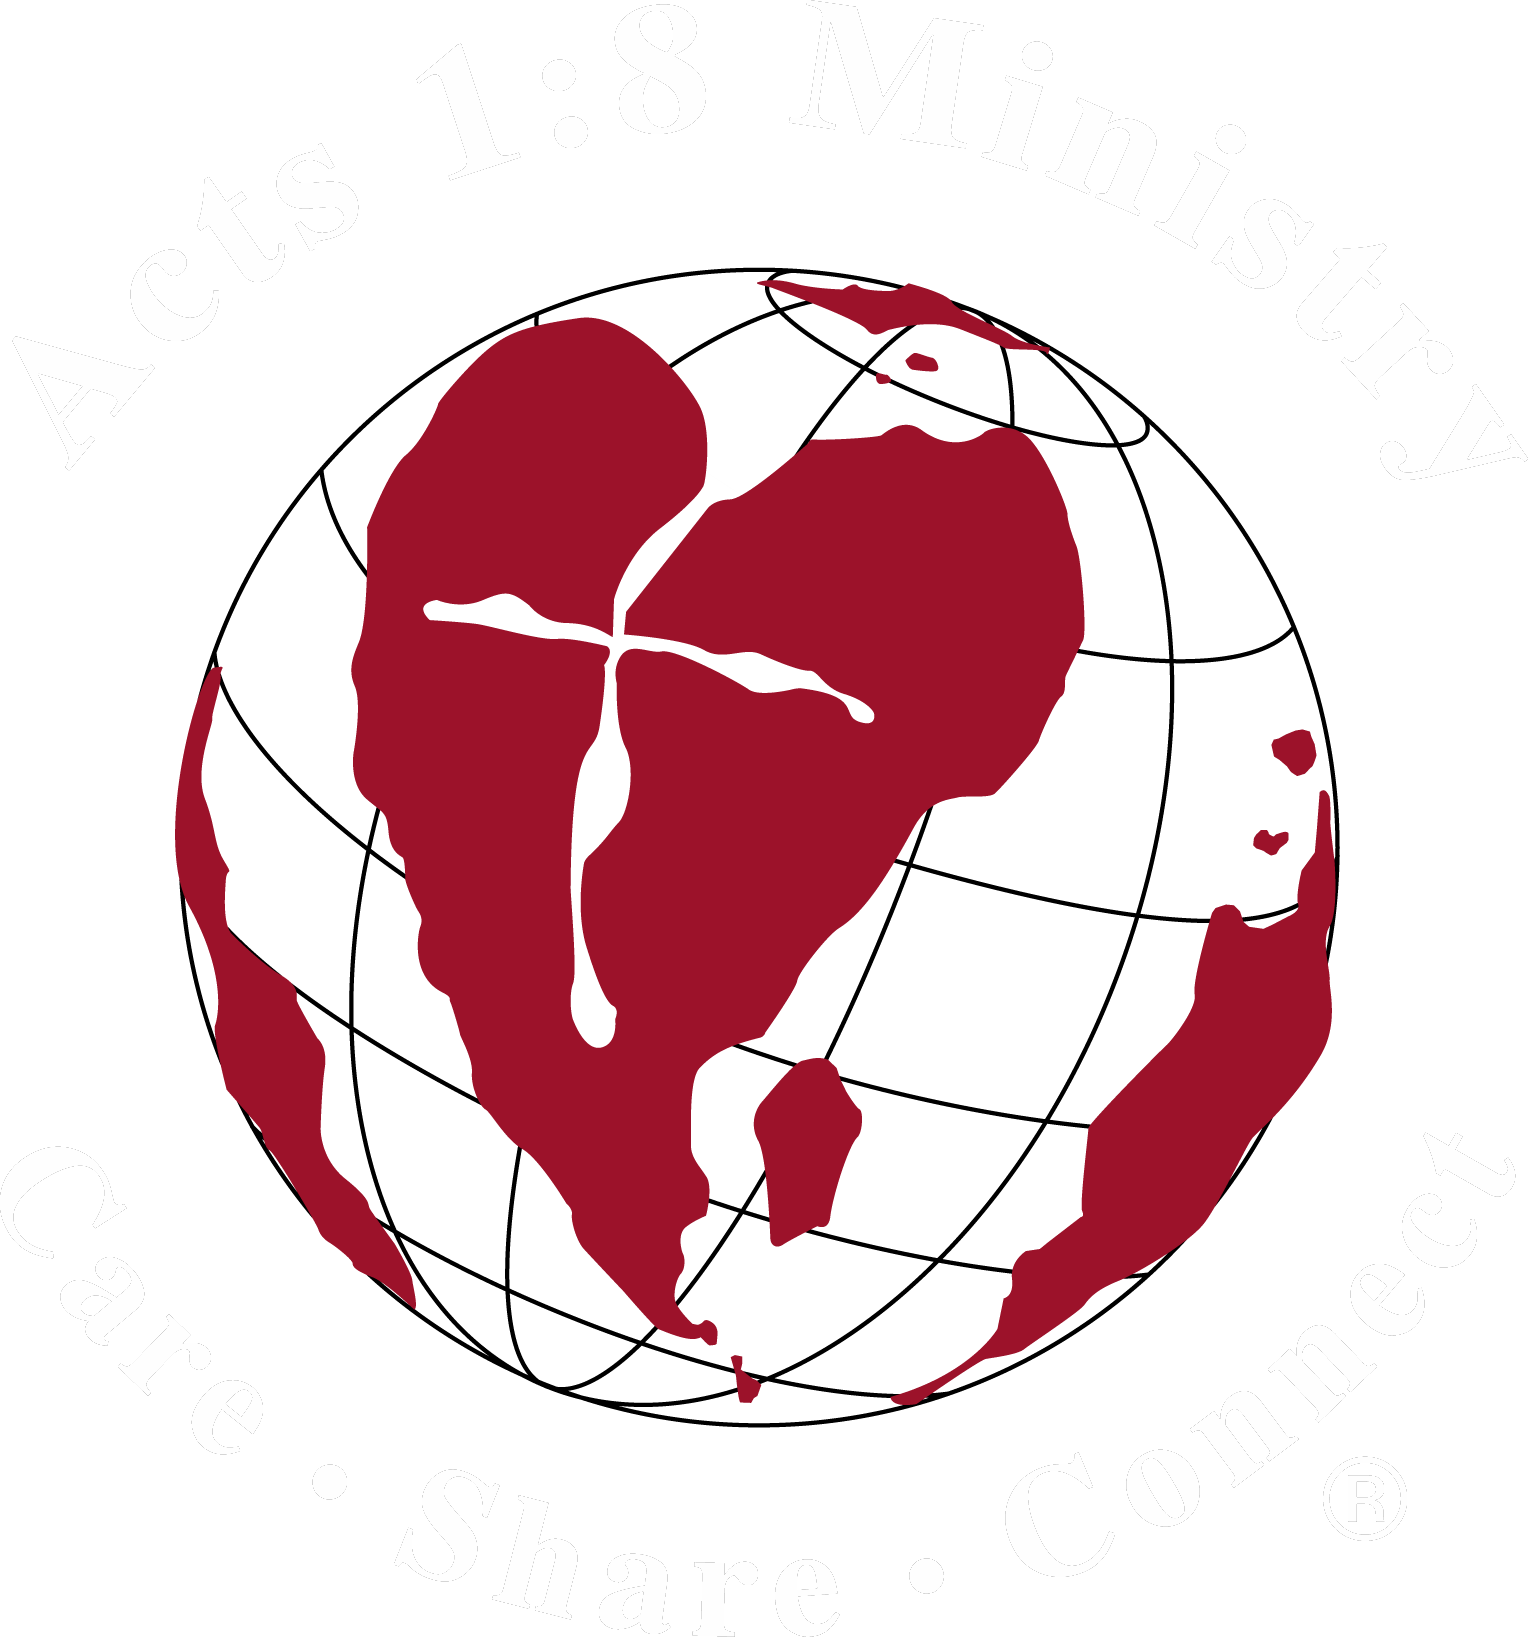 Sharing God\'s Love With The World - Acts 1:8 Ministry to offer free training for its Acts of Kindness Outreach Program